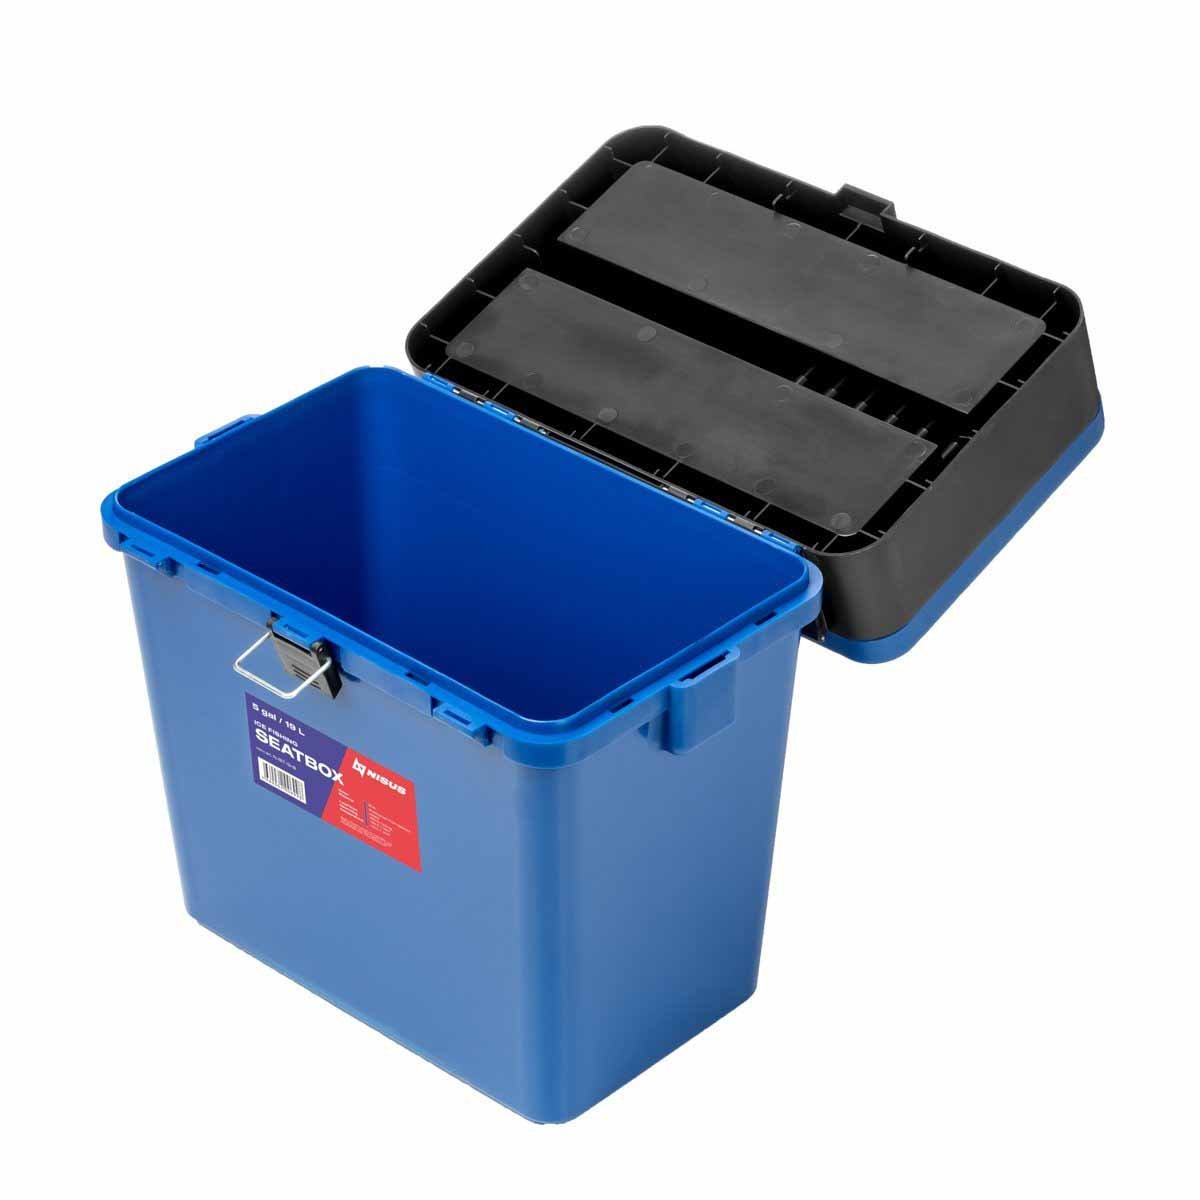 Ice Fishing Bucket Type Box with Seat and Adjustable Shoulder Strap has 2 compartments for tackle storage